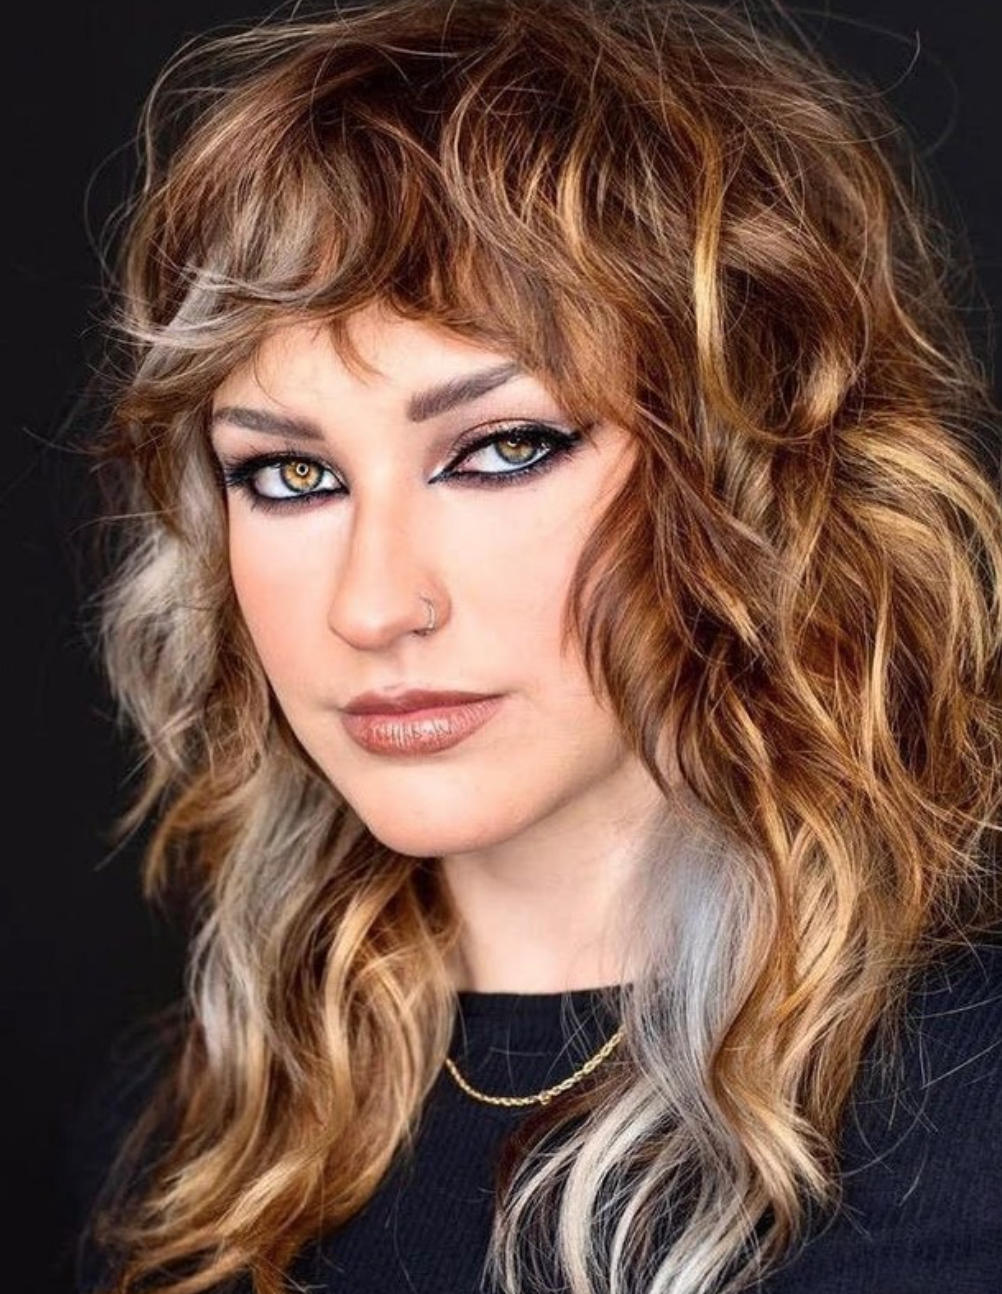 A woman with a multi-colored hair and dark eyeliner looks off to the side.